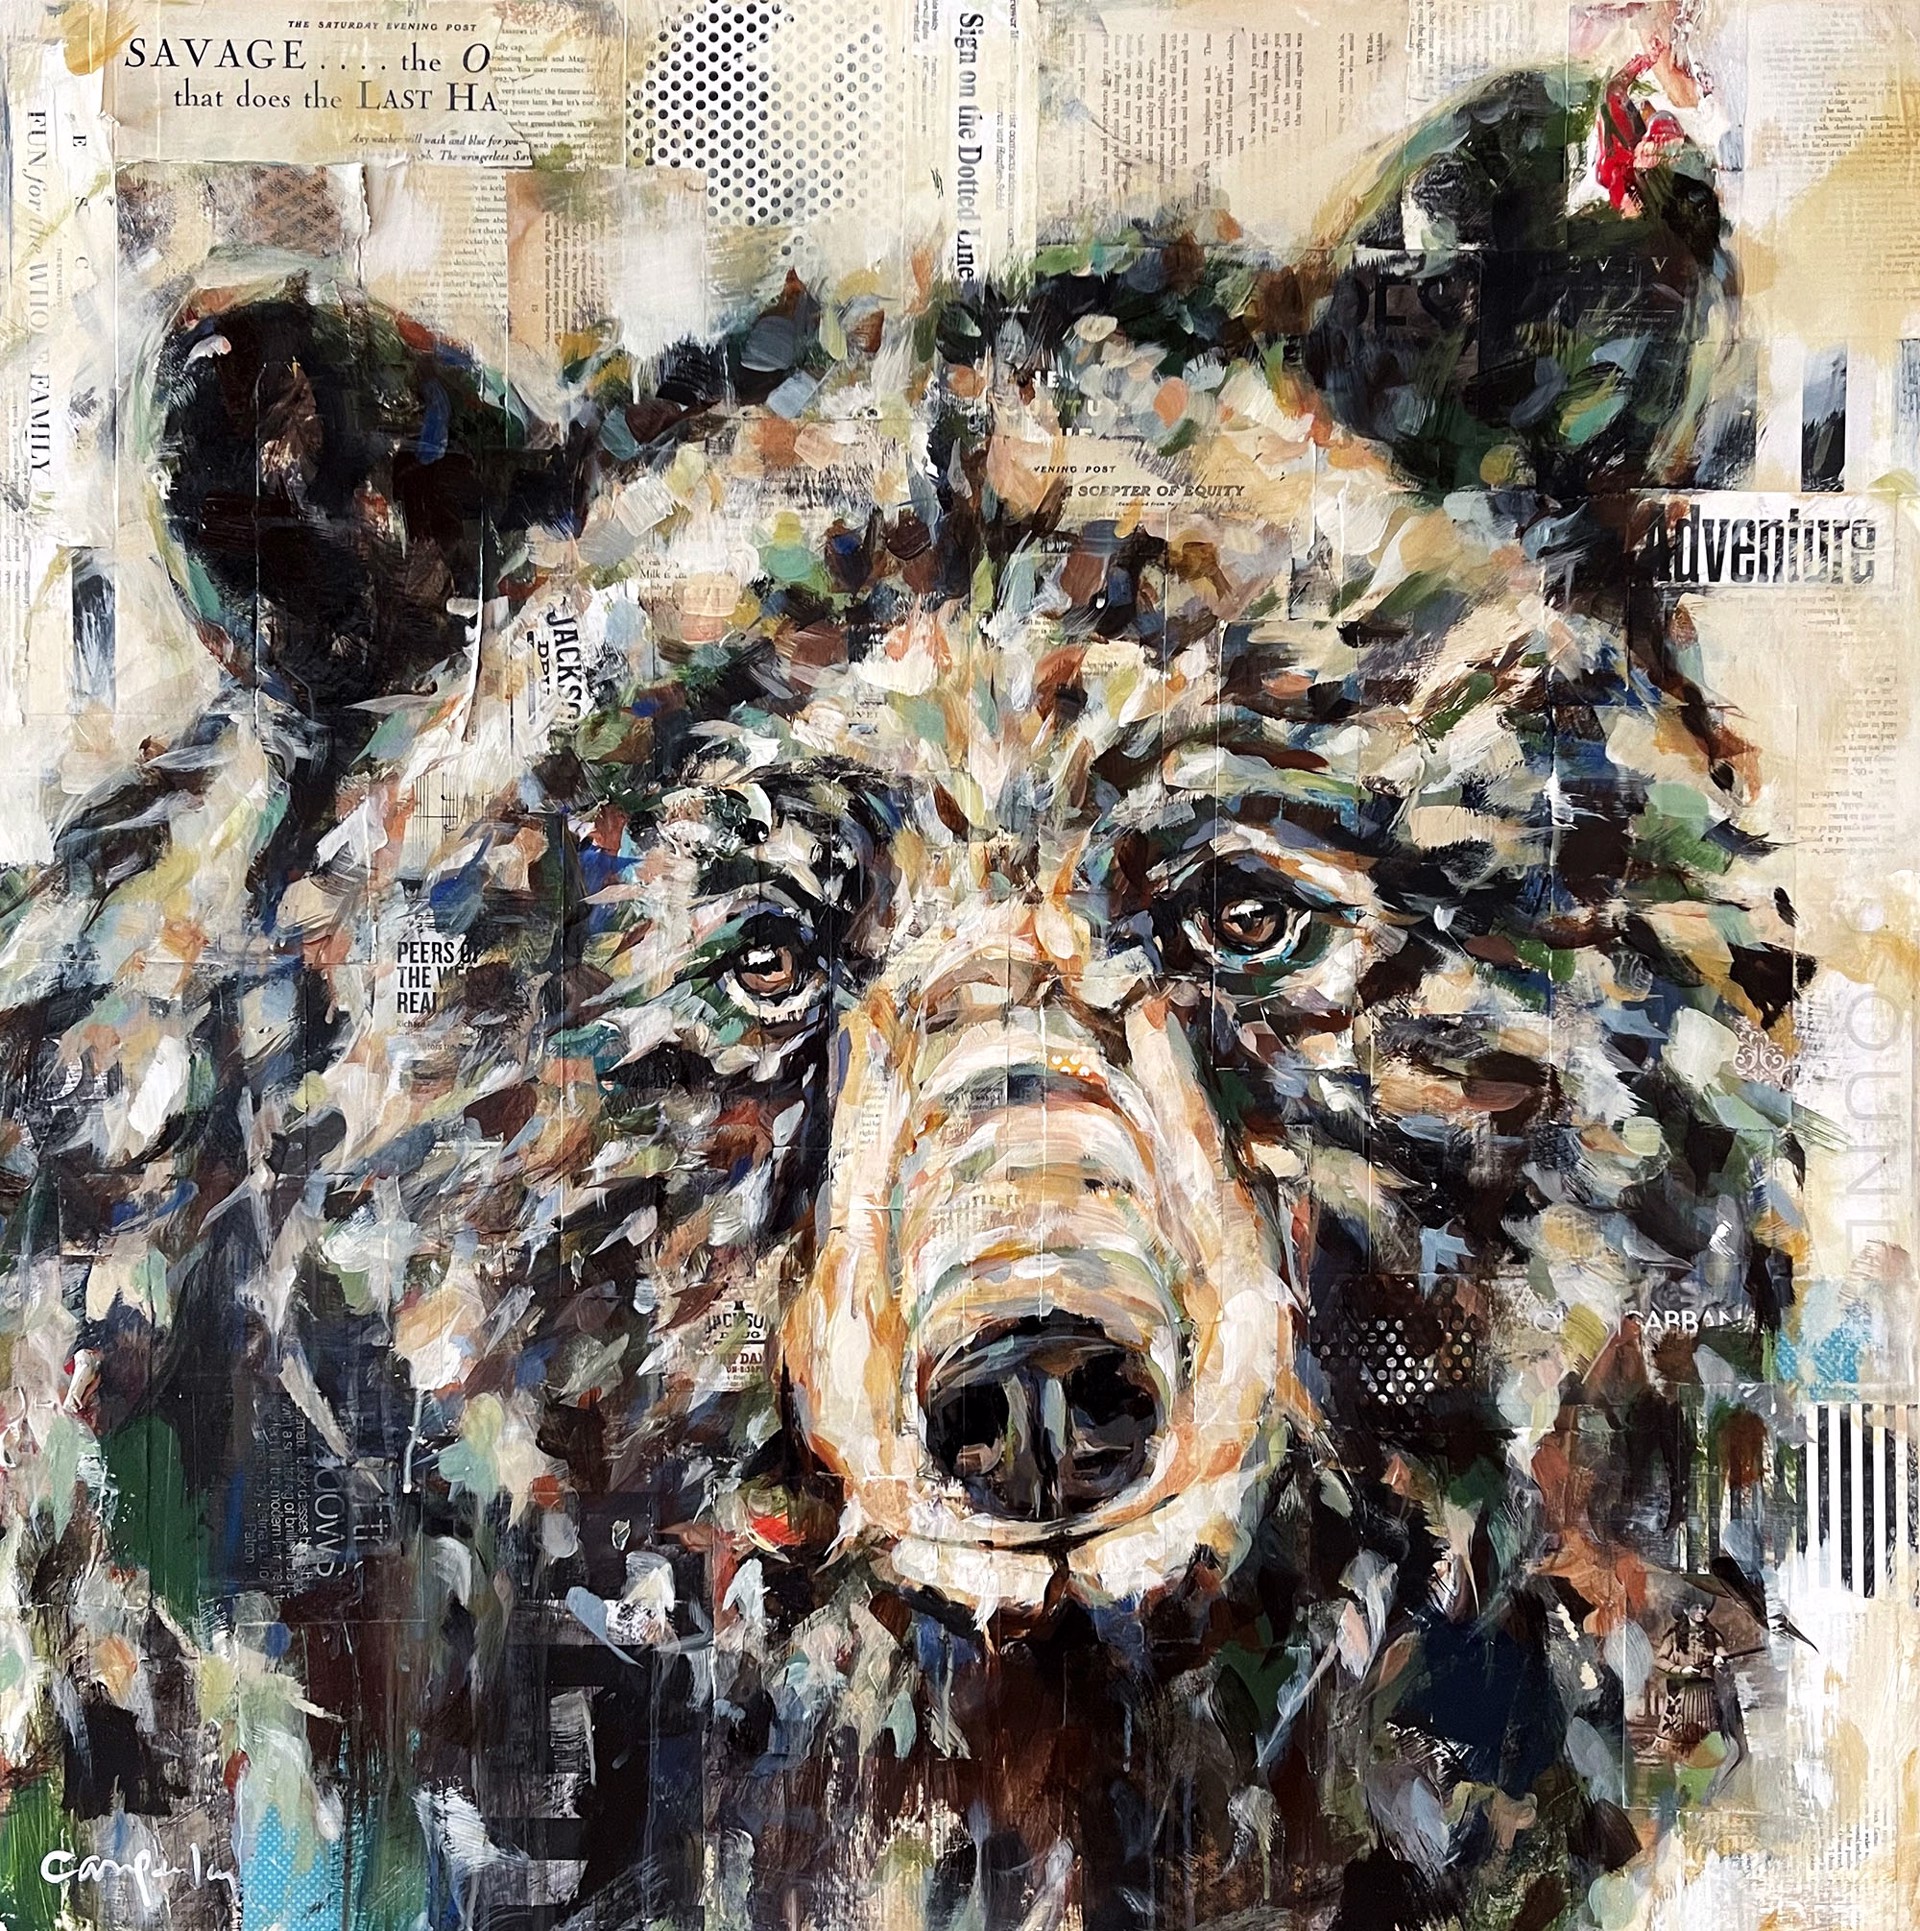 Original Mixed Media Painting By Carrie Penley Featuring A Bear Face With Collage Details